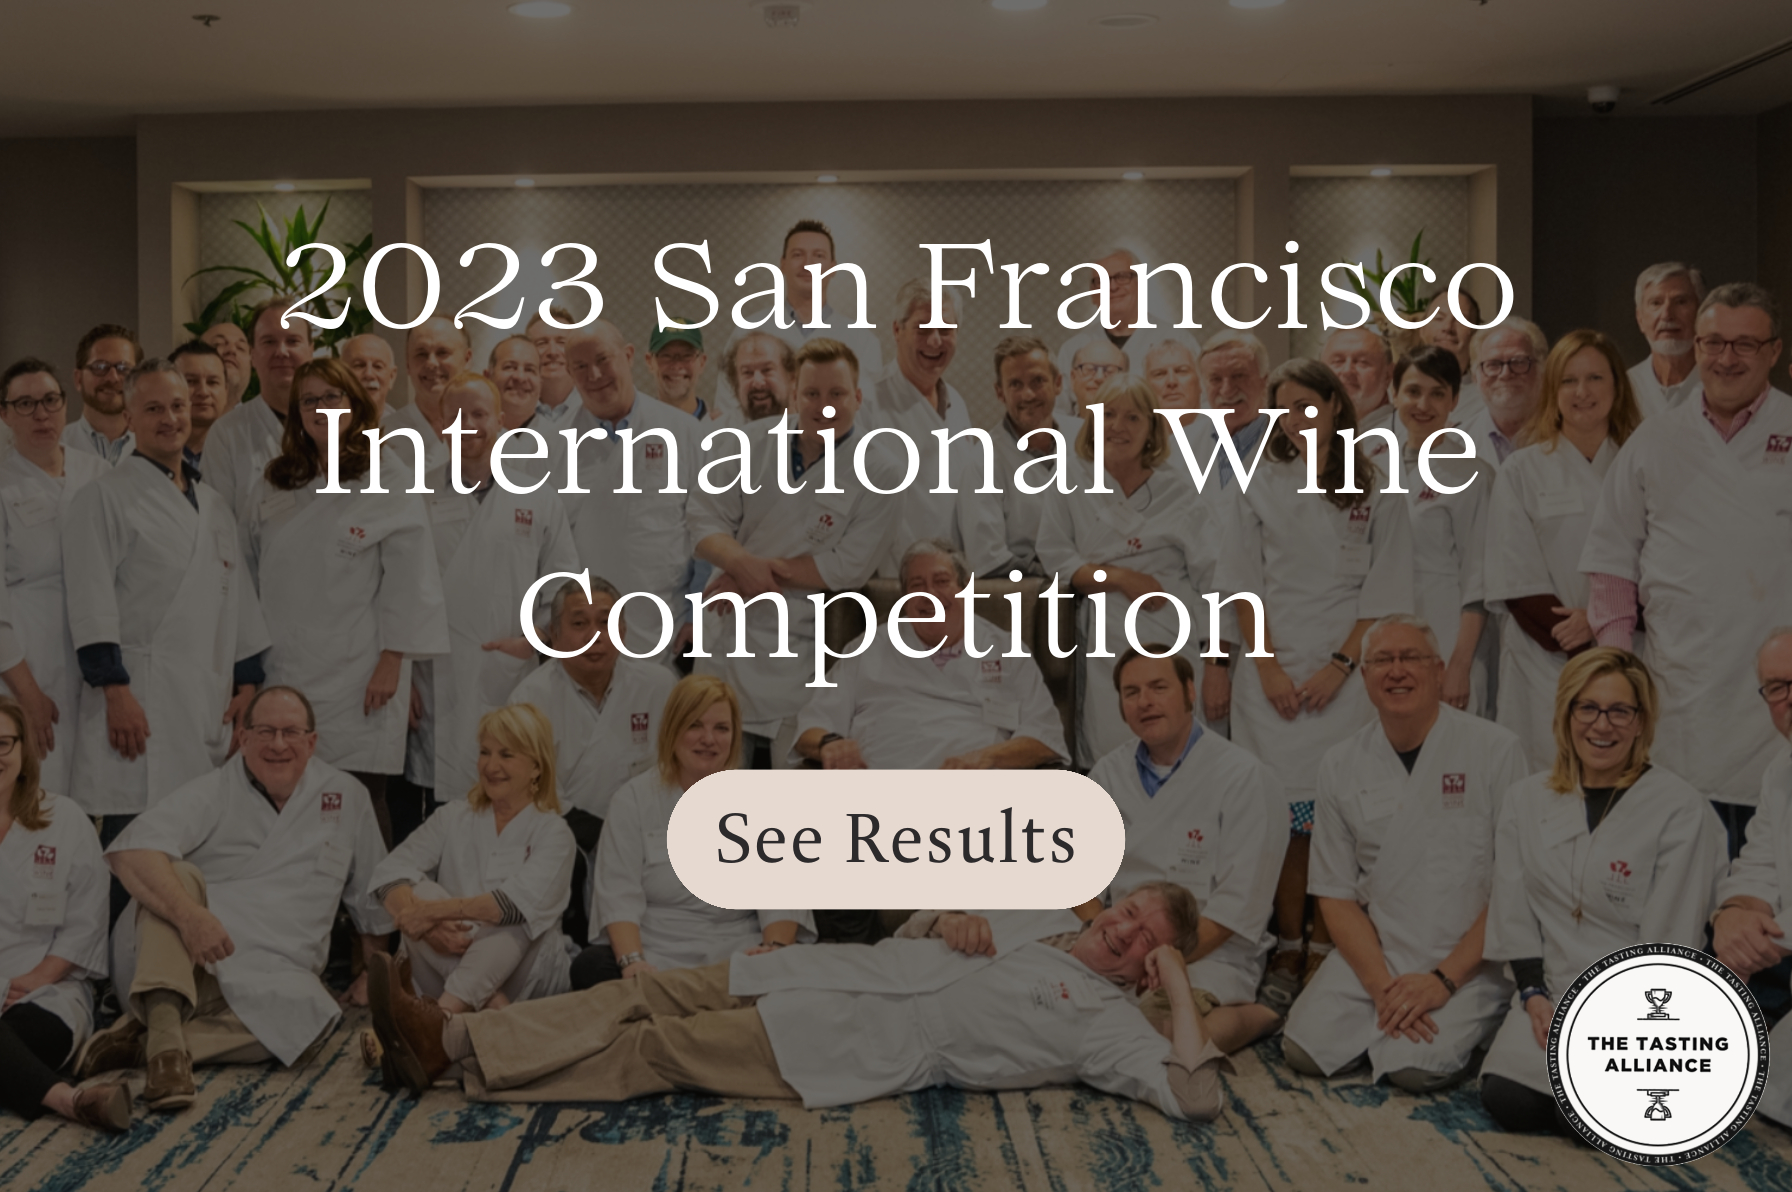 The results of The Tasting Alliance's 2023 San Francisco International Wine Competition